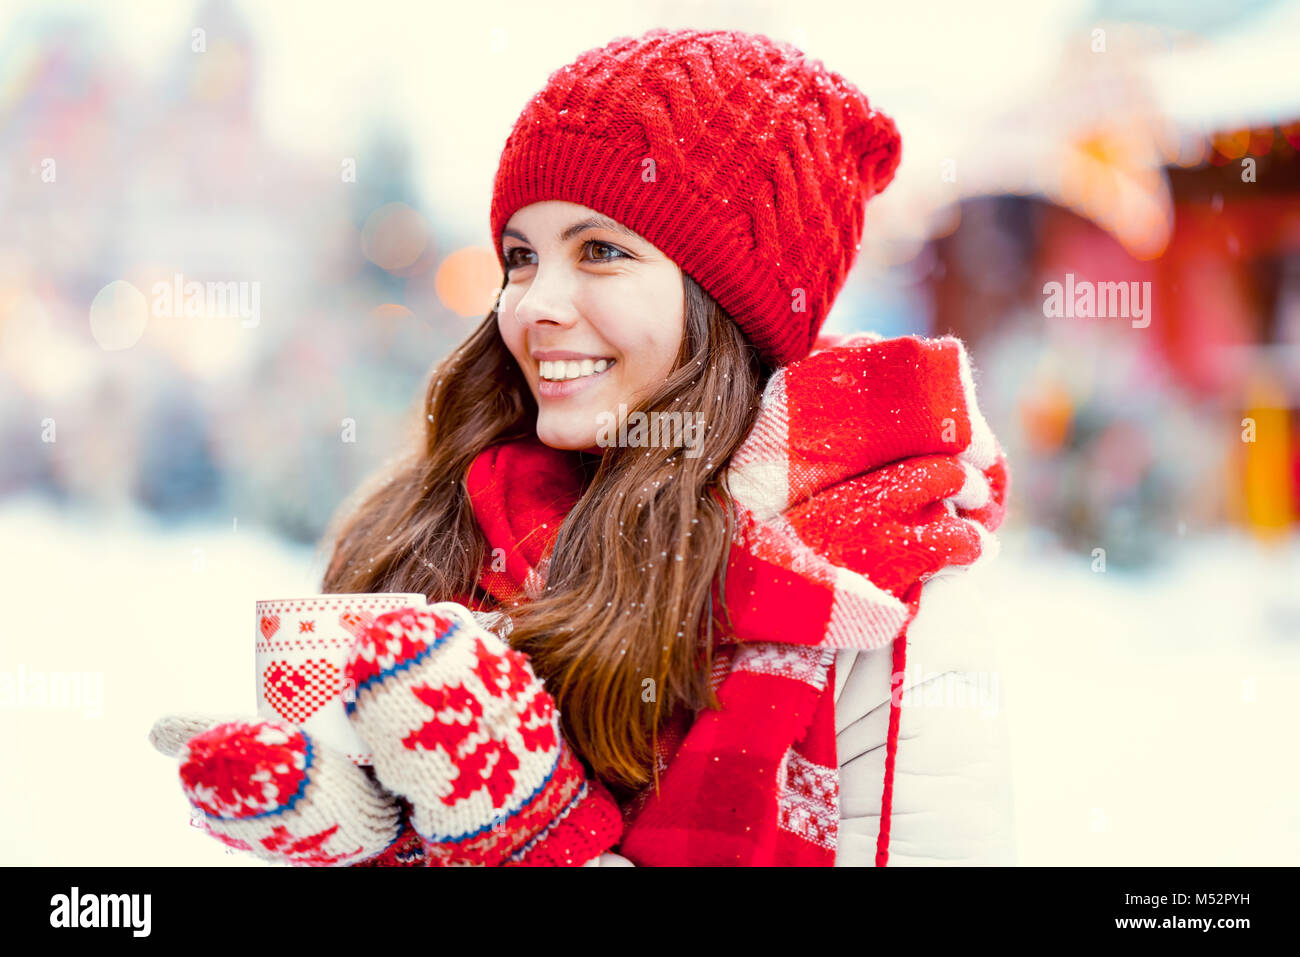 Young girl outdoors Stock Photo